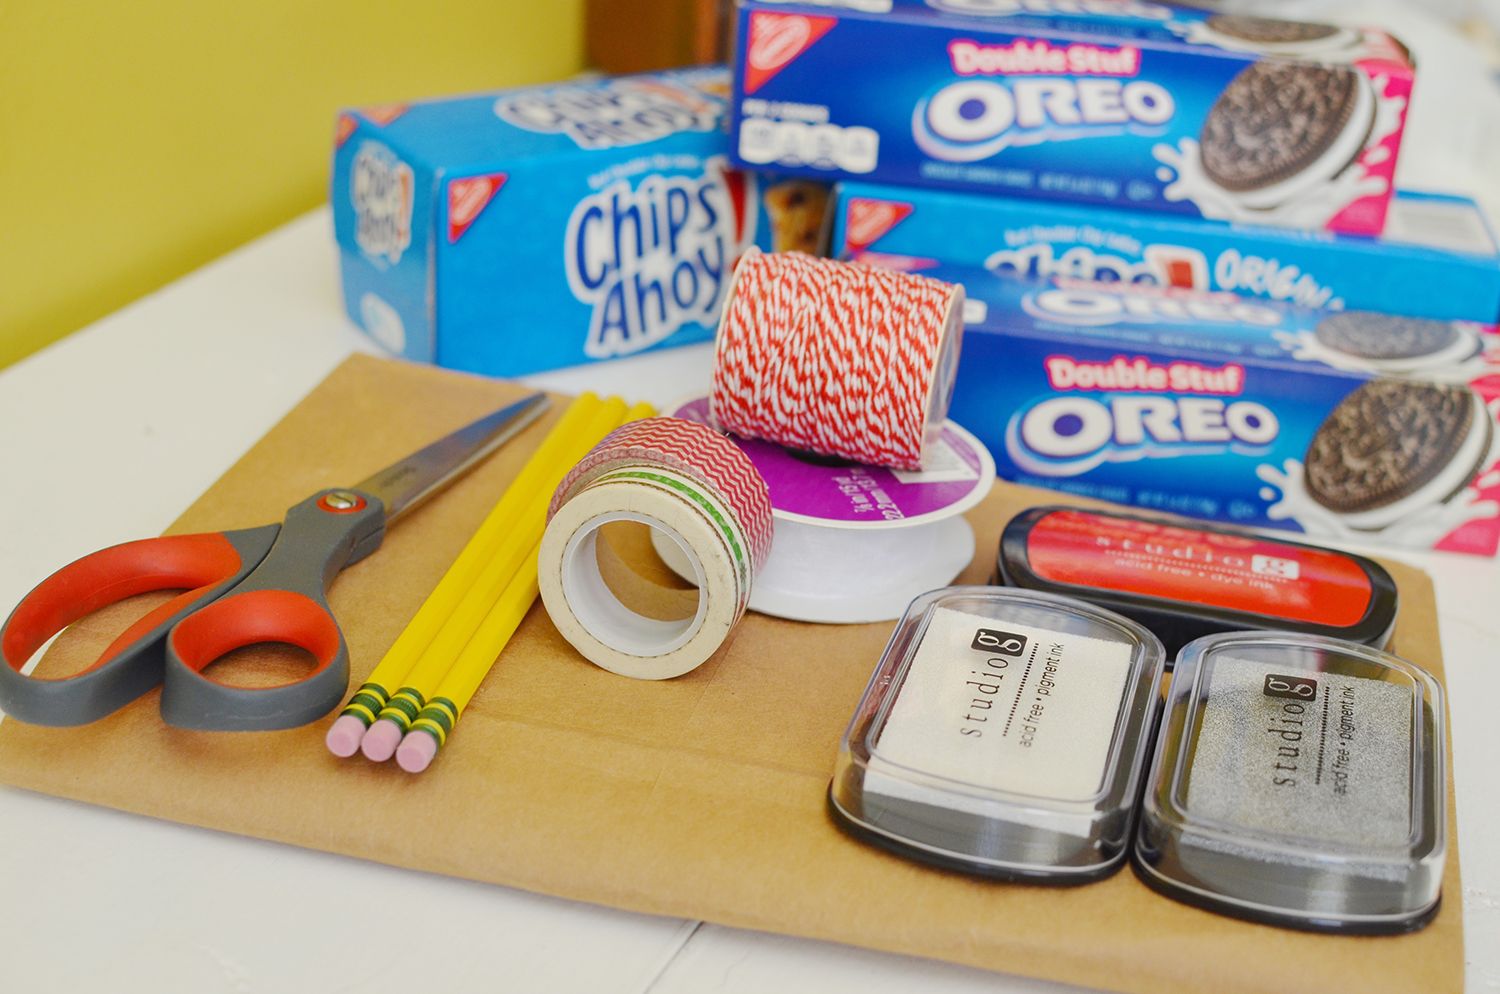 Supplies for creating your own wrapping paper. #shop